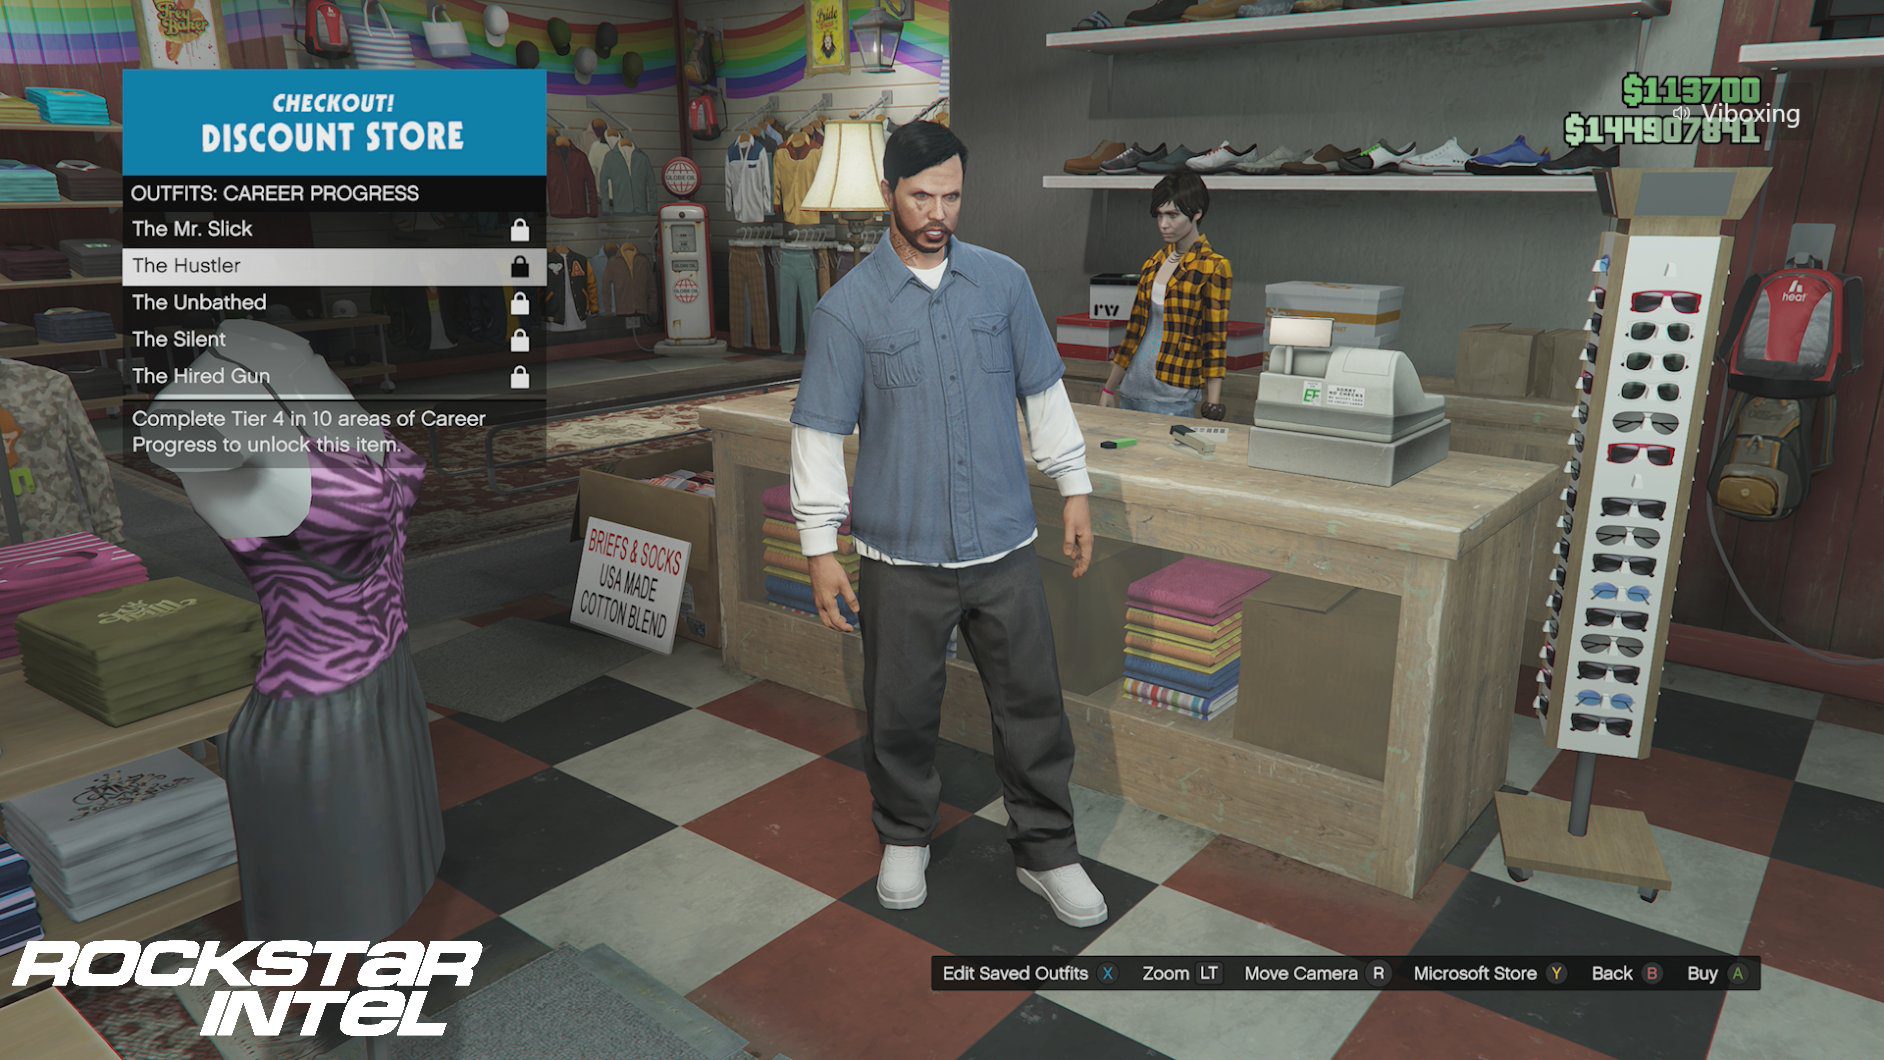 inspired Nikobellic outfits like & follow for more! #gta5 #gtaoutfits, Inspired Outfits